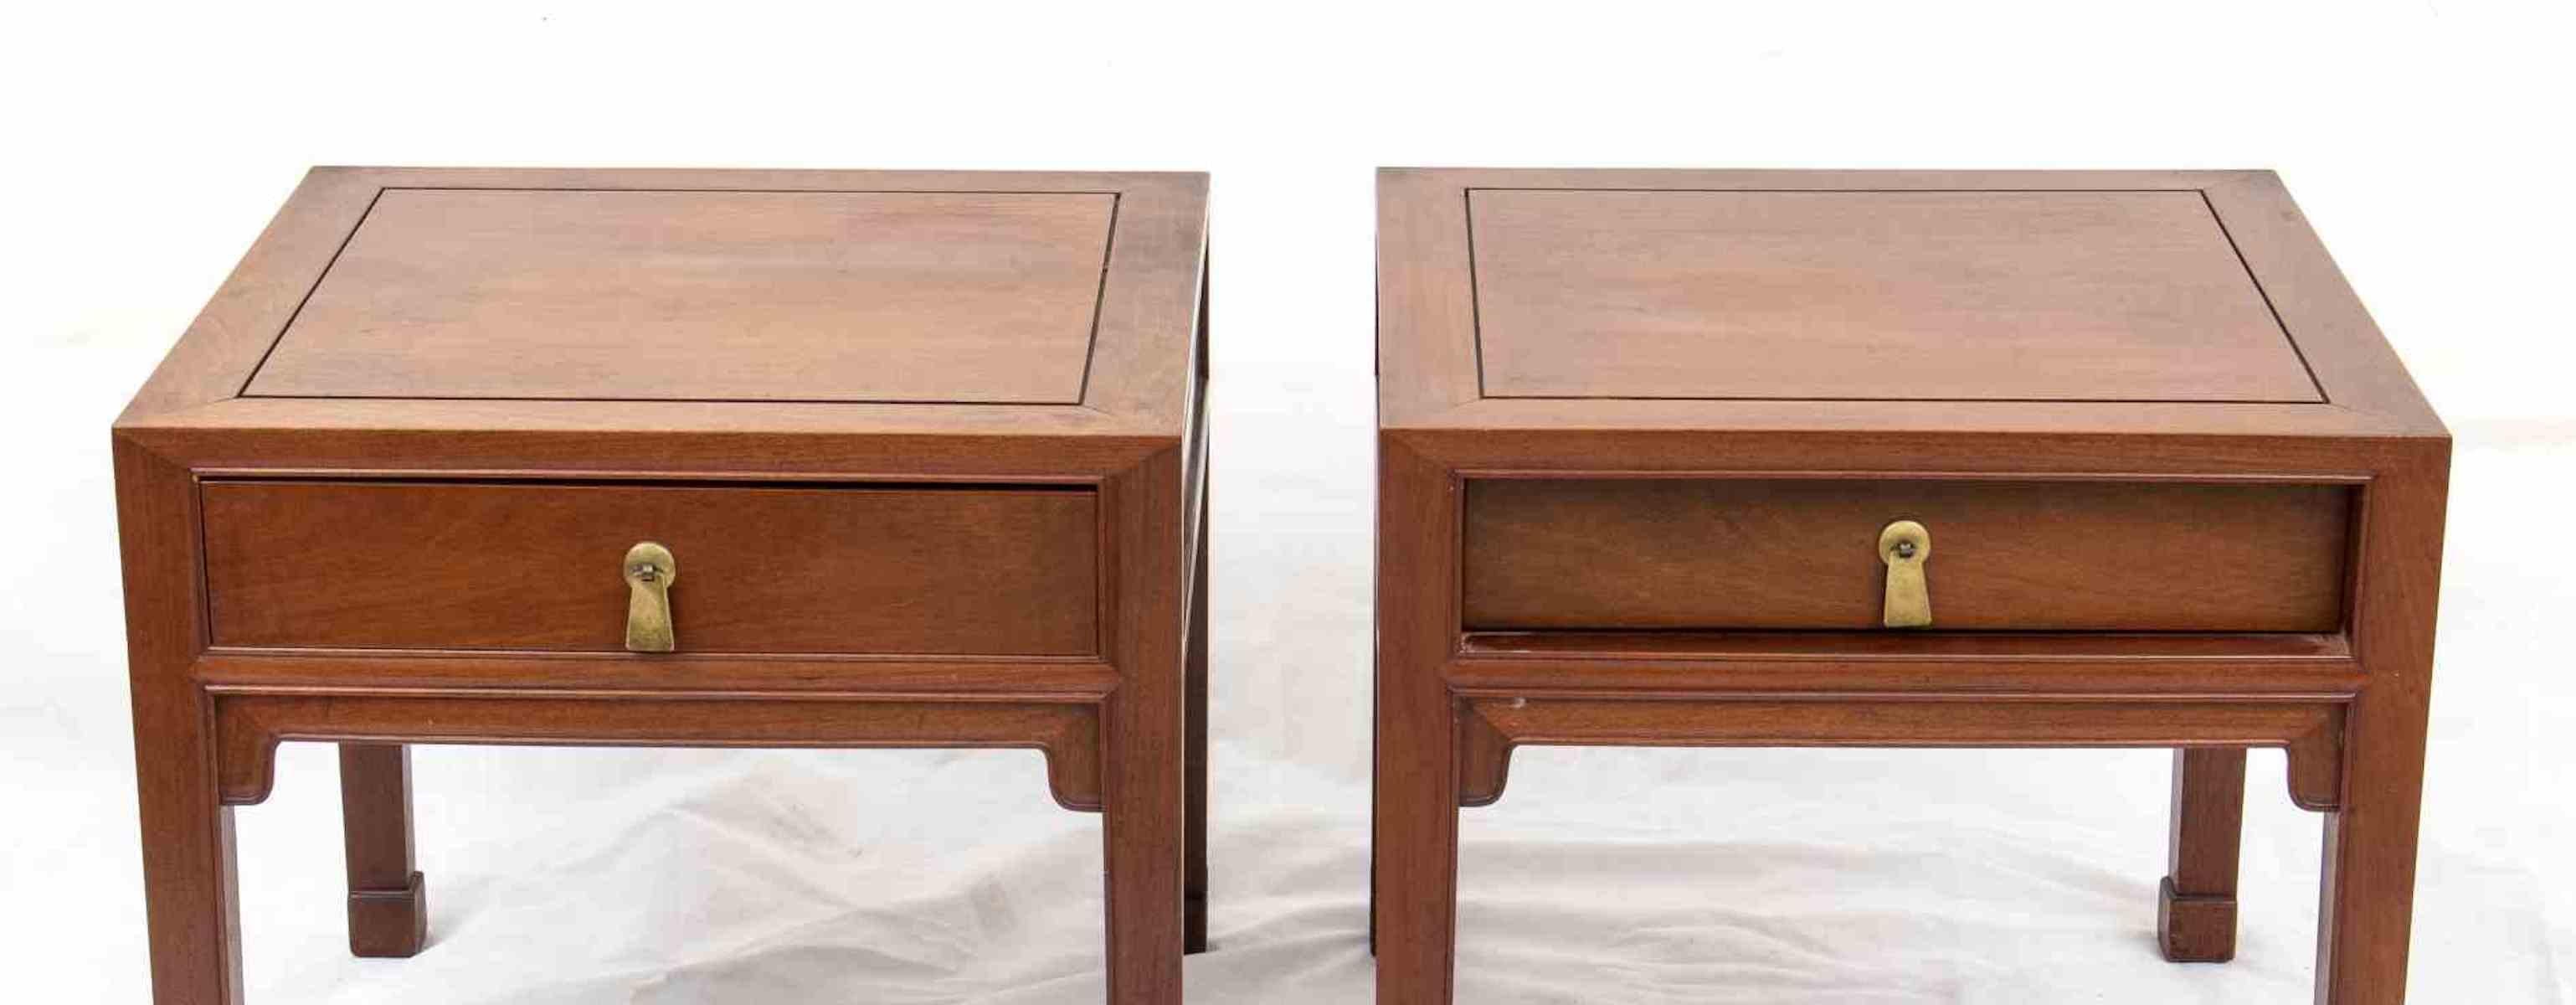 Pair of Wood Low Tables, China, Mid-20th Century 1